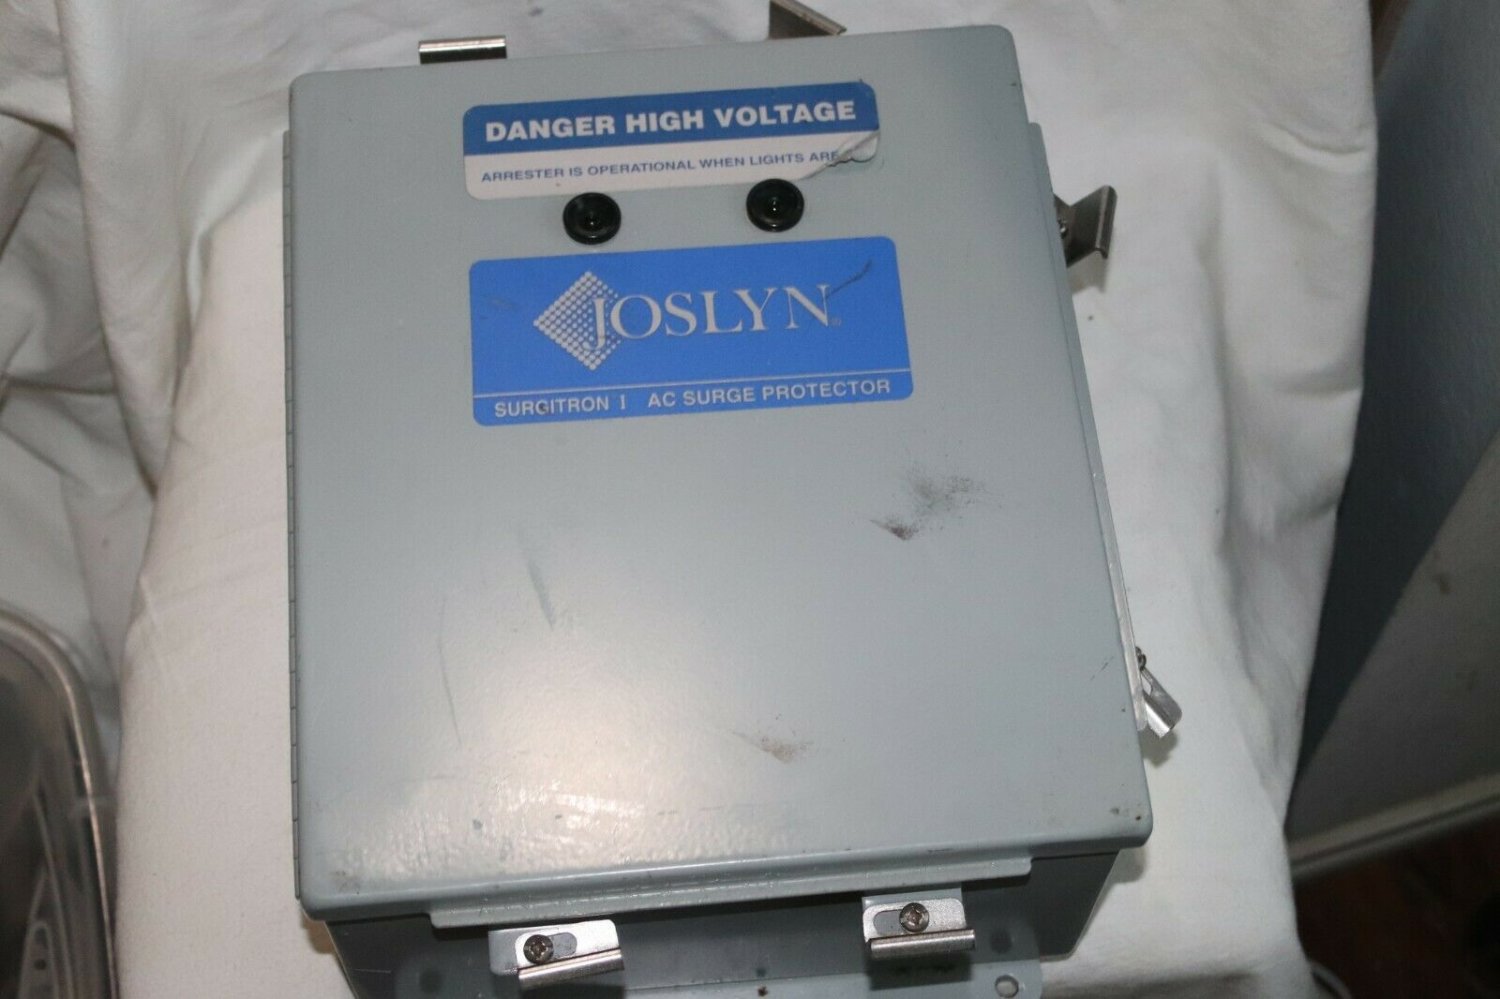 Joslyn 1265-85 Surgitron AC Surge Protector 120/240V 1-Phase 3-Wire Like New